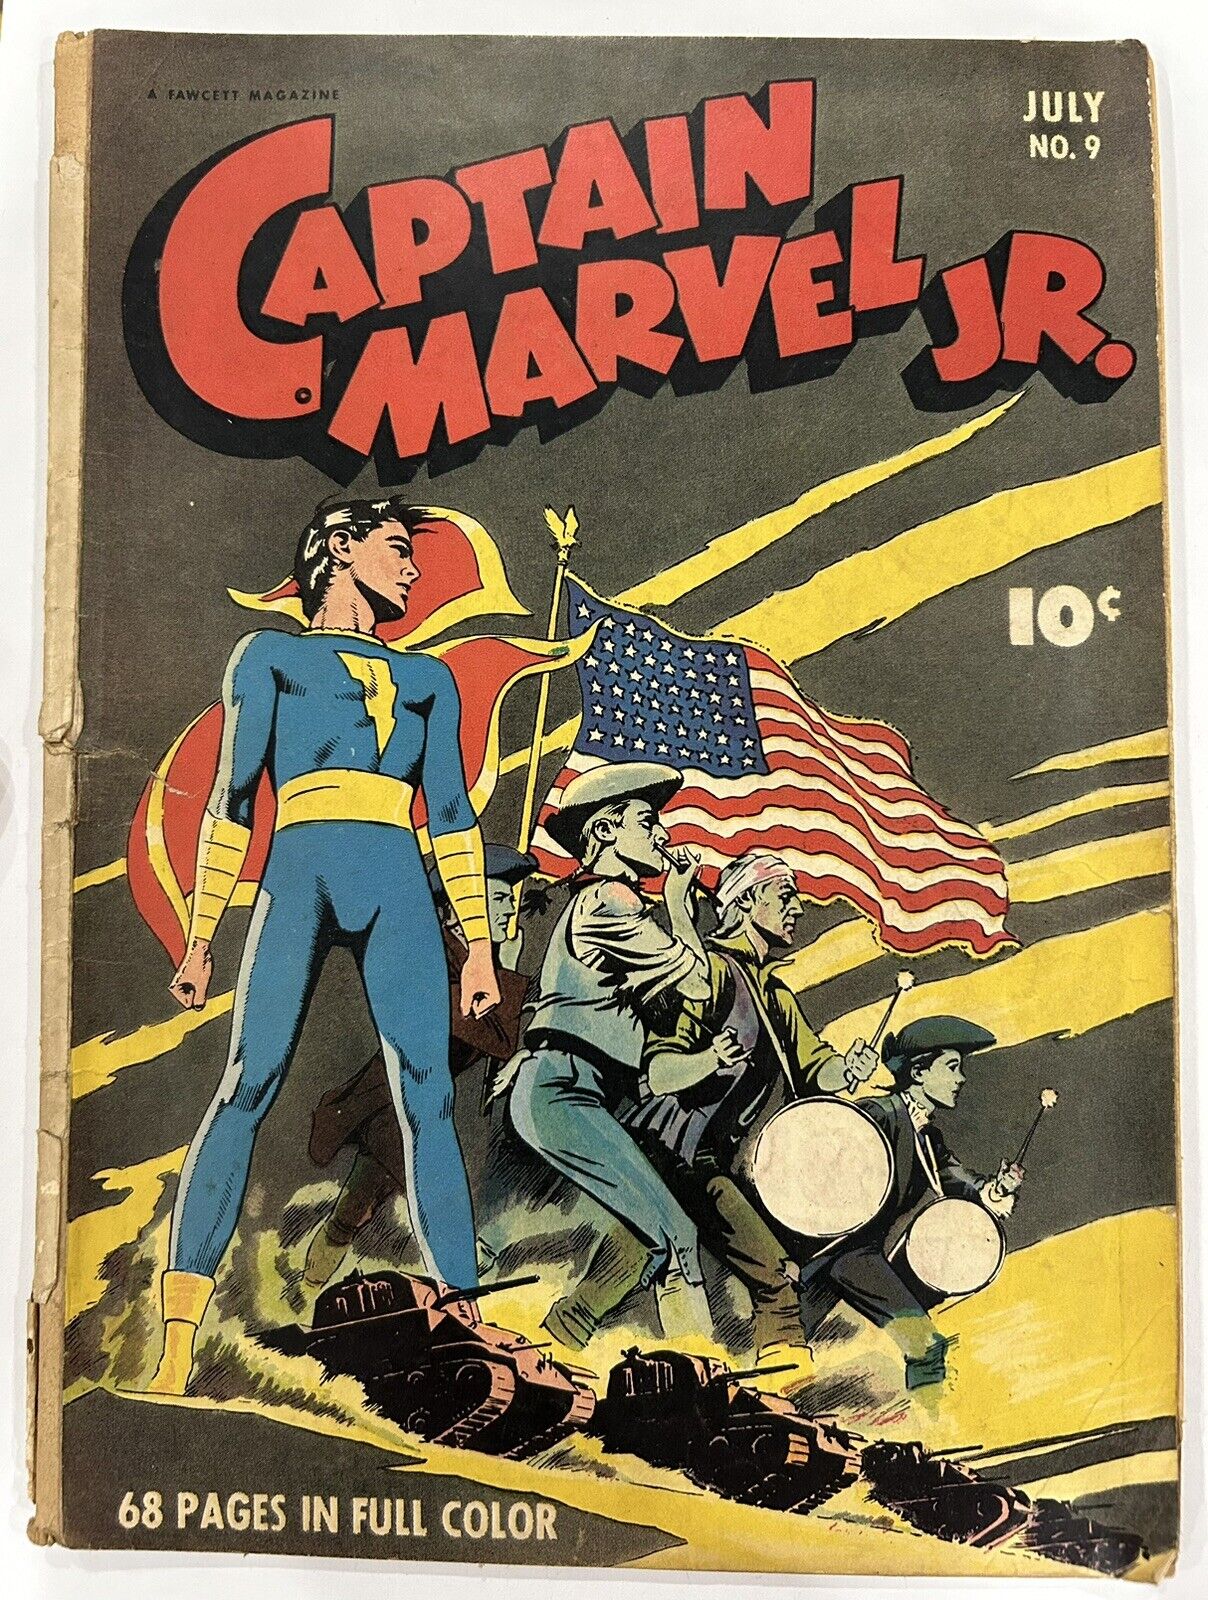 Captain Marvel Jr # 9 Classic Flag Cover Rare July 1943. Iconic